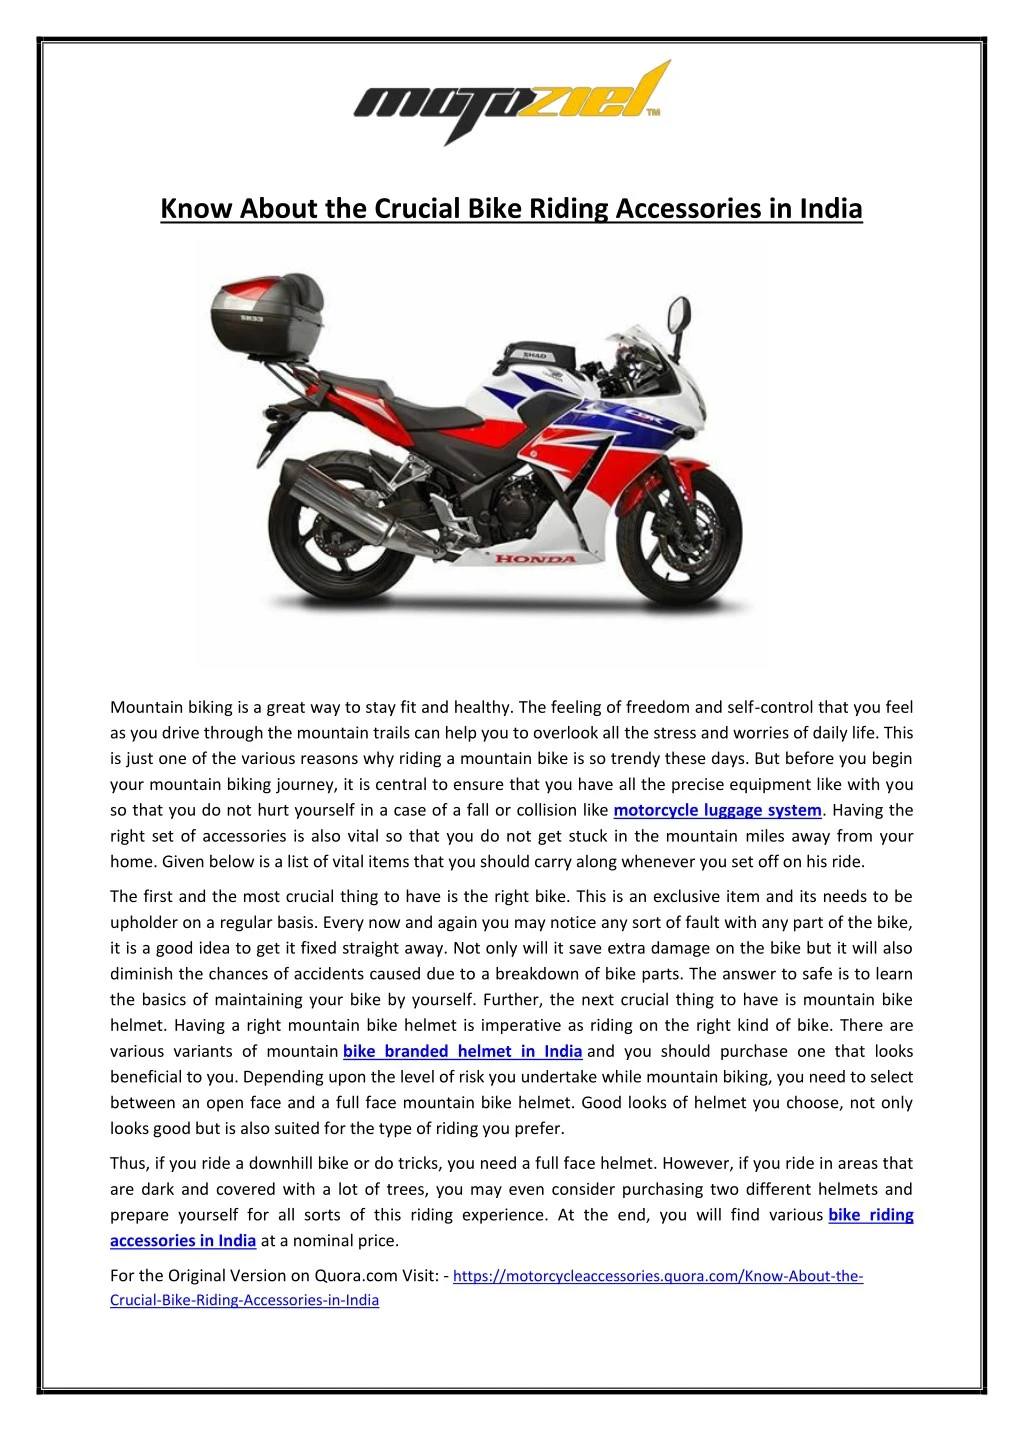 know about the crucial bike riding accessories